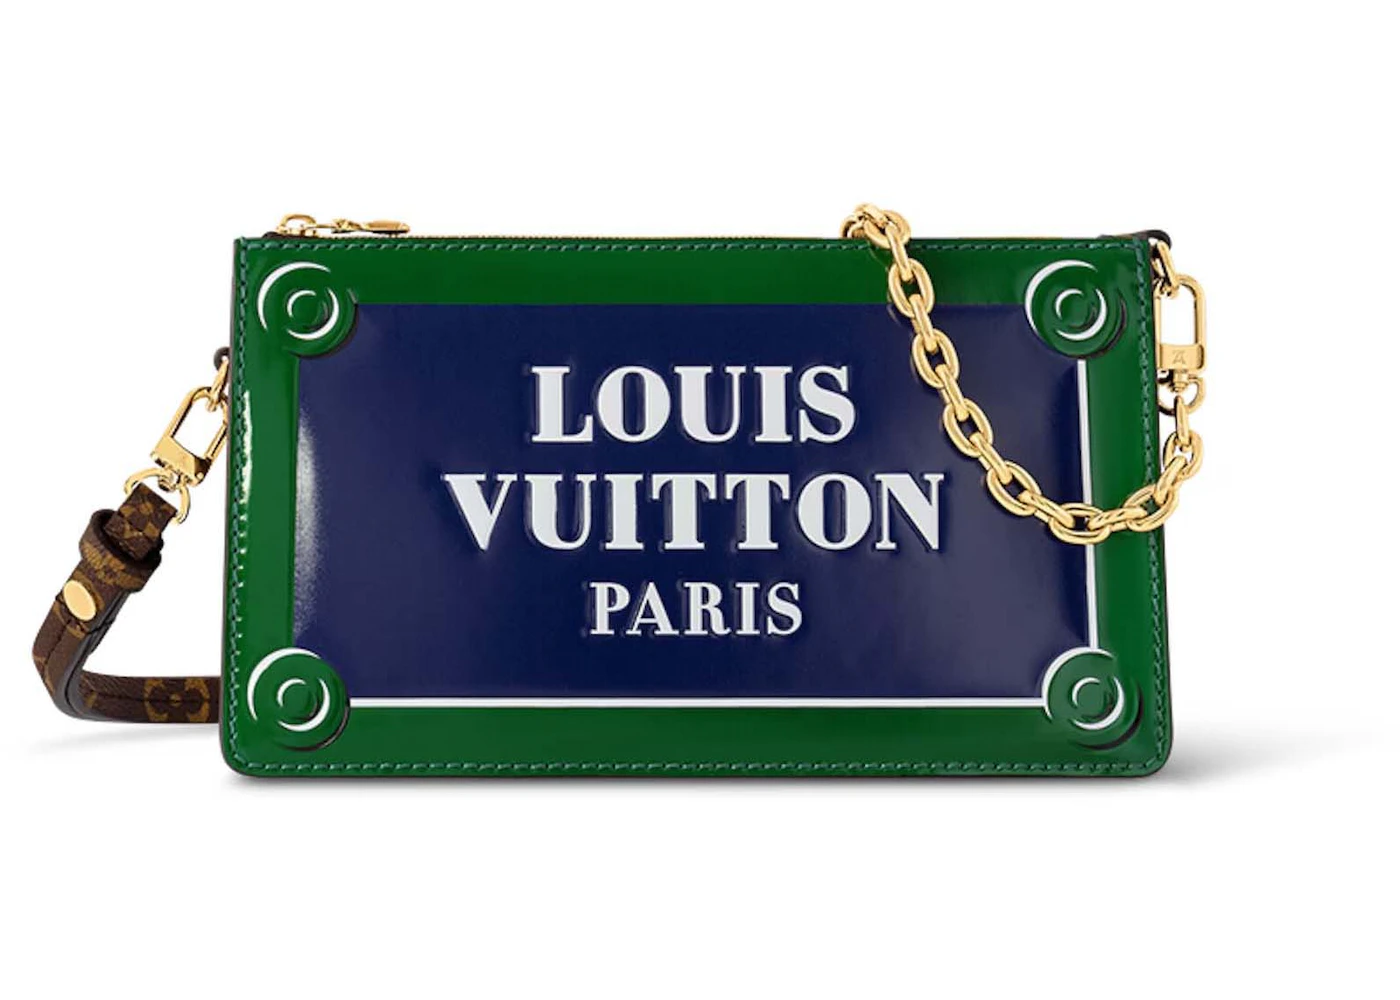 Louis Vuitton Lexington Pouch Blue/Green in Calfskin Leather with